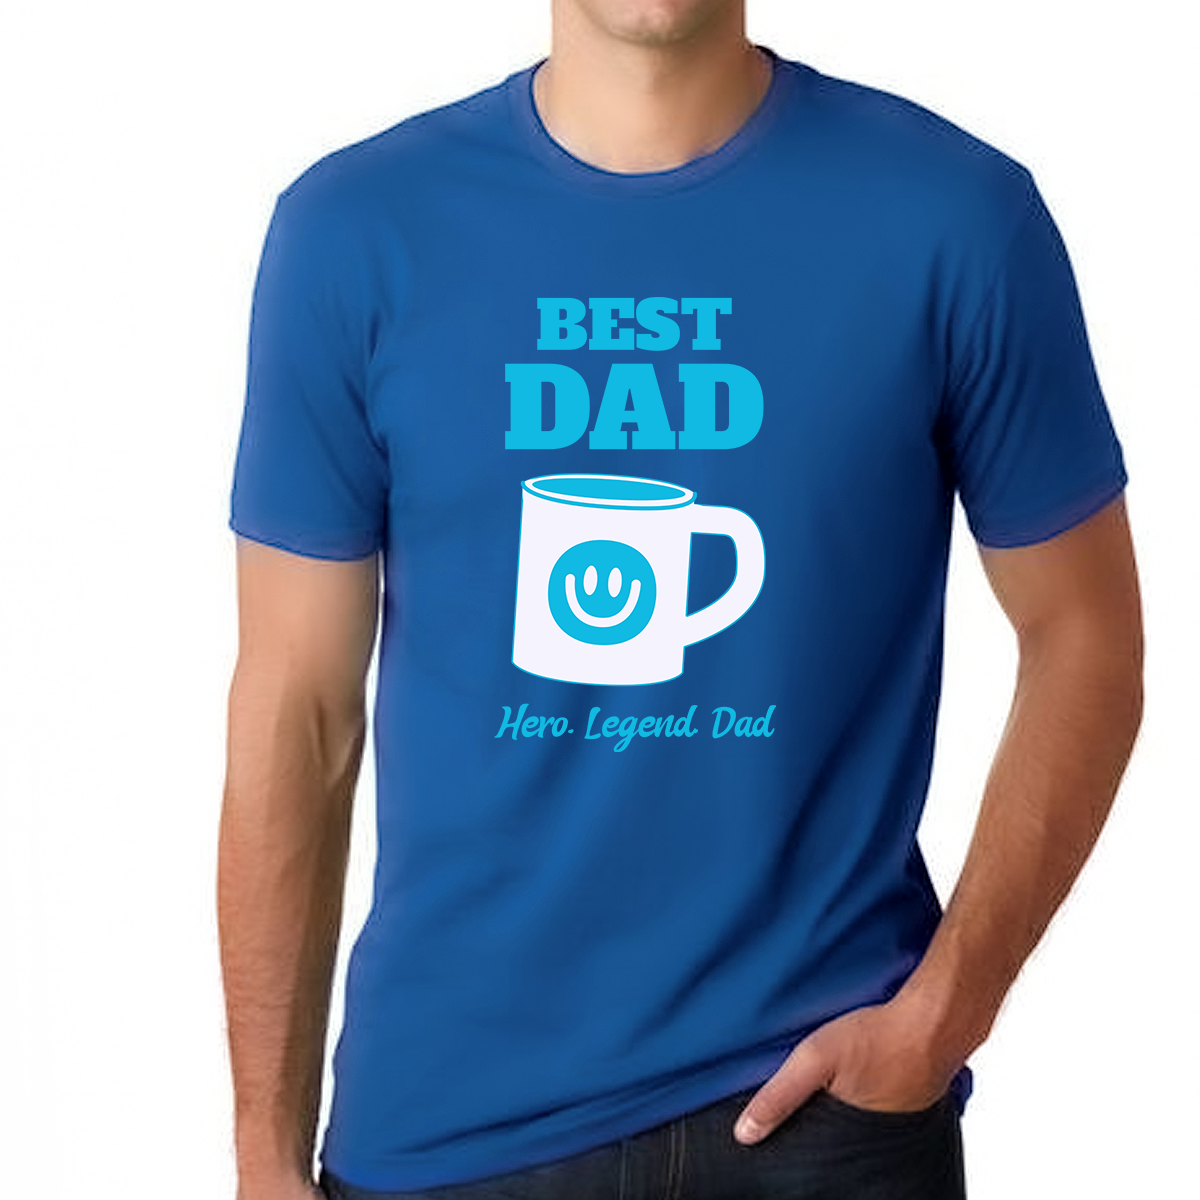 Dad Shirts for Men Coffe Fathers Day Shirt Dad Shirt Papa Shirt Girl Dad Shirt for Men